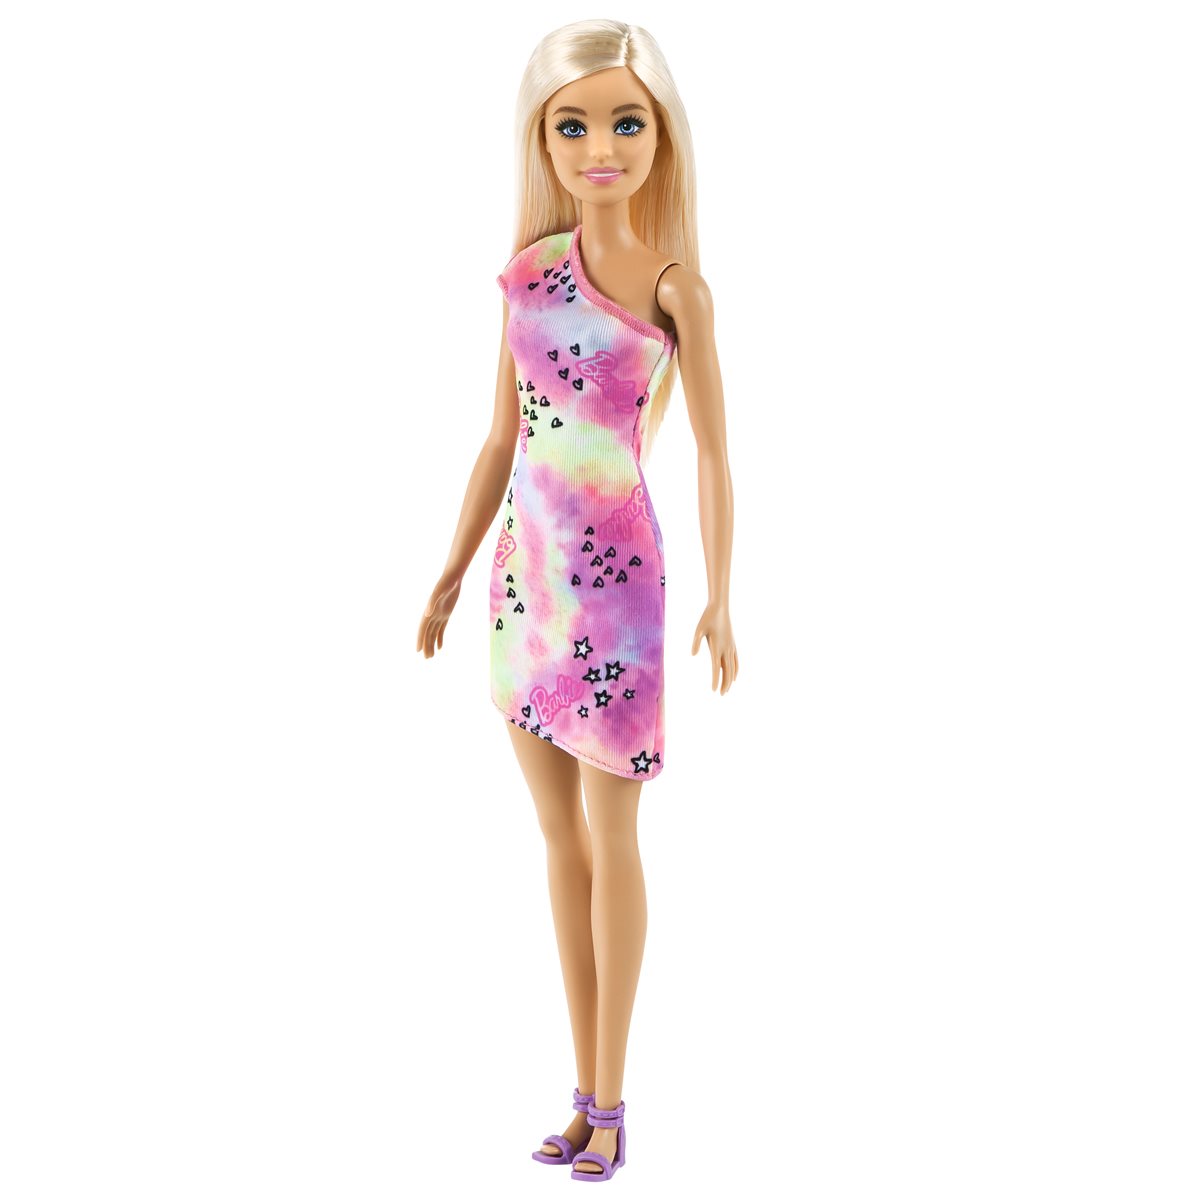 Barbie Doll with Pink Tie-Dye Dress and Blonde Hair